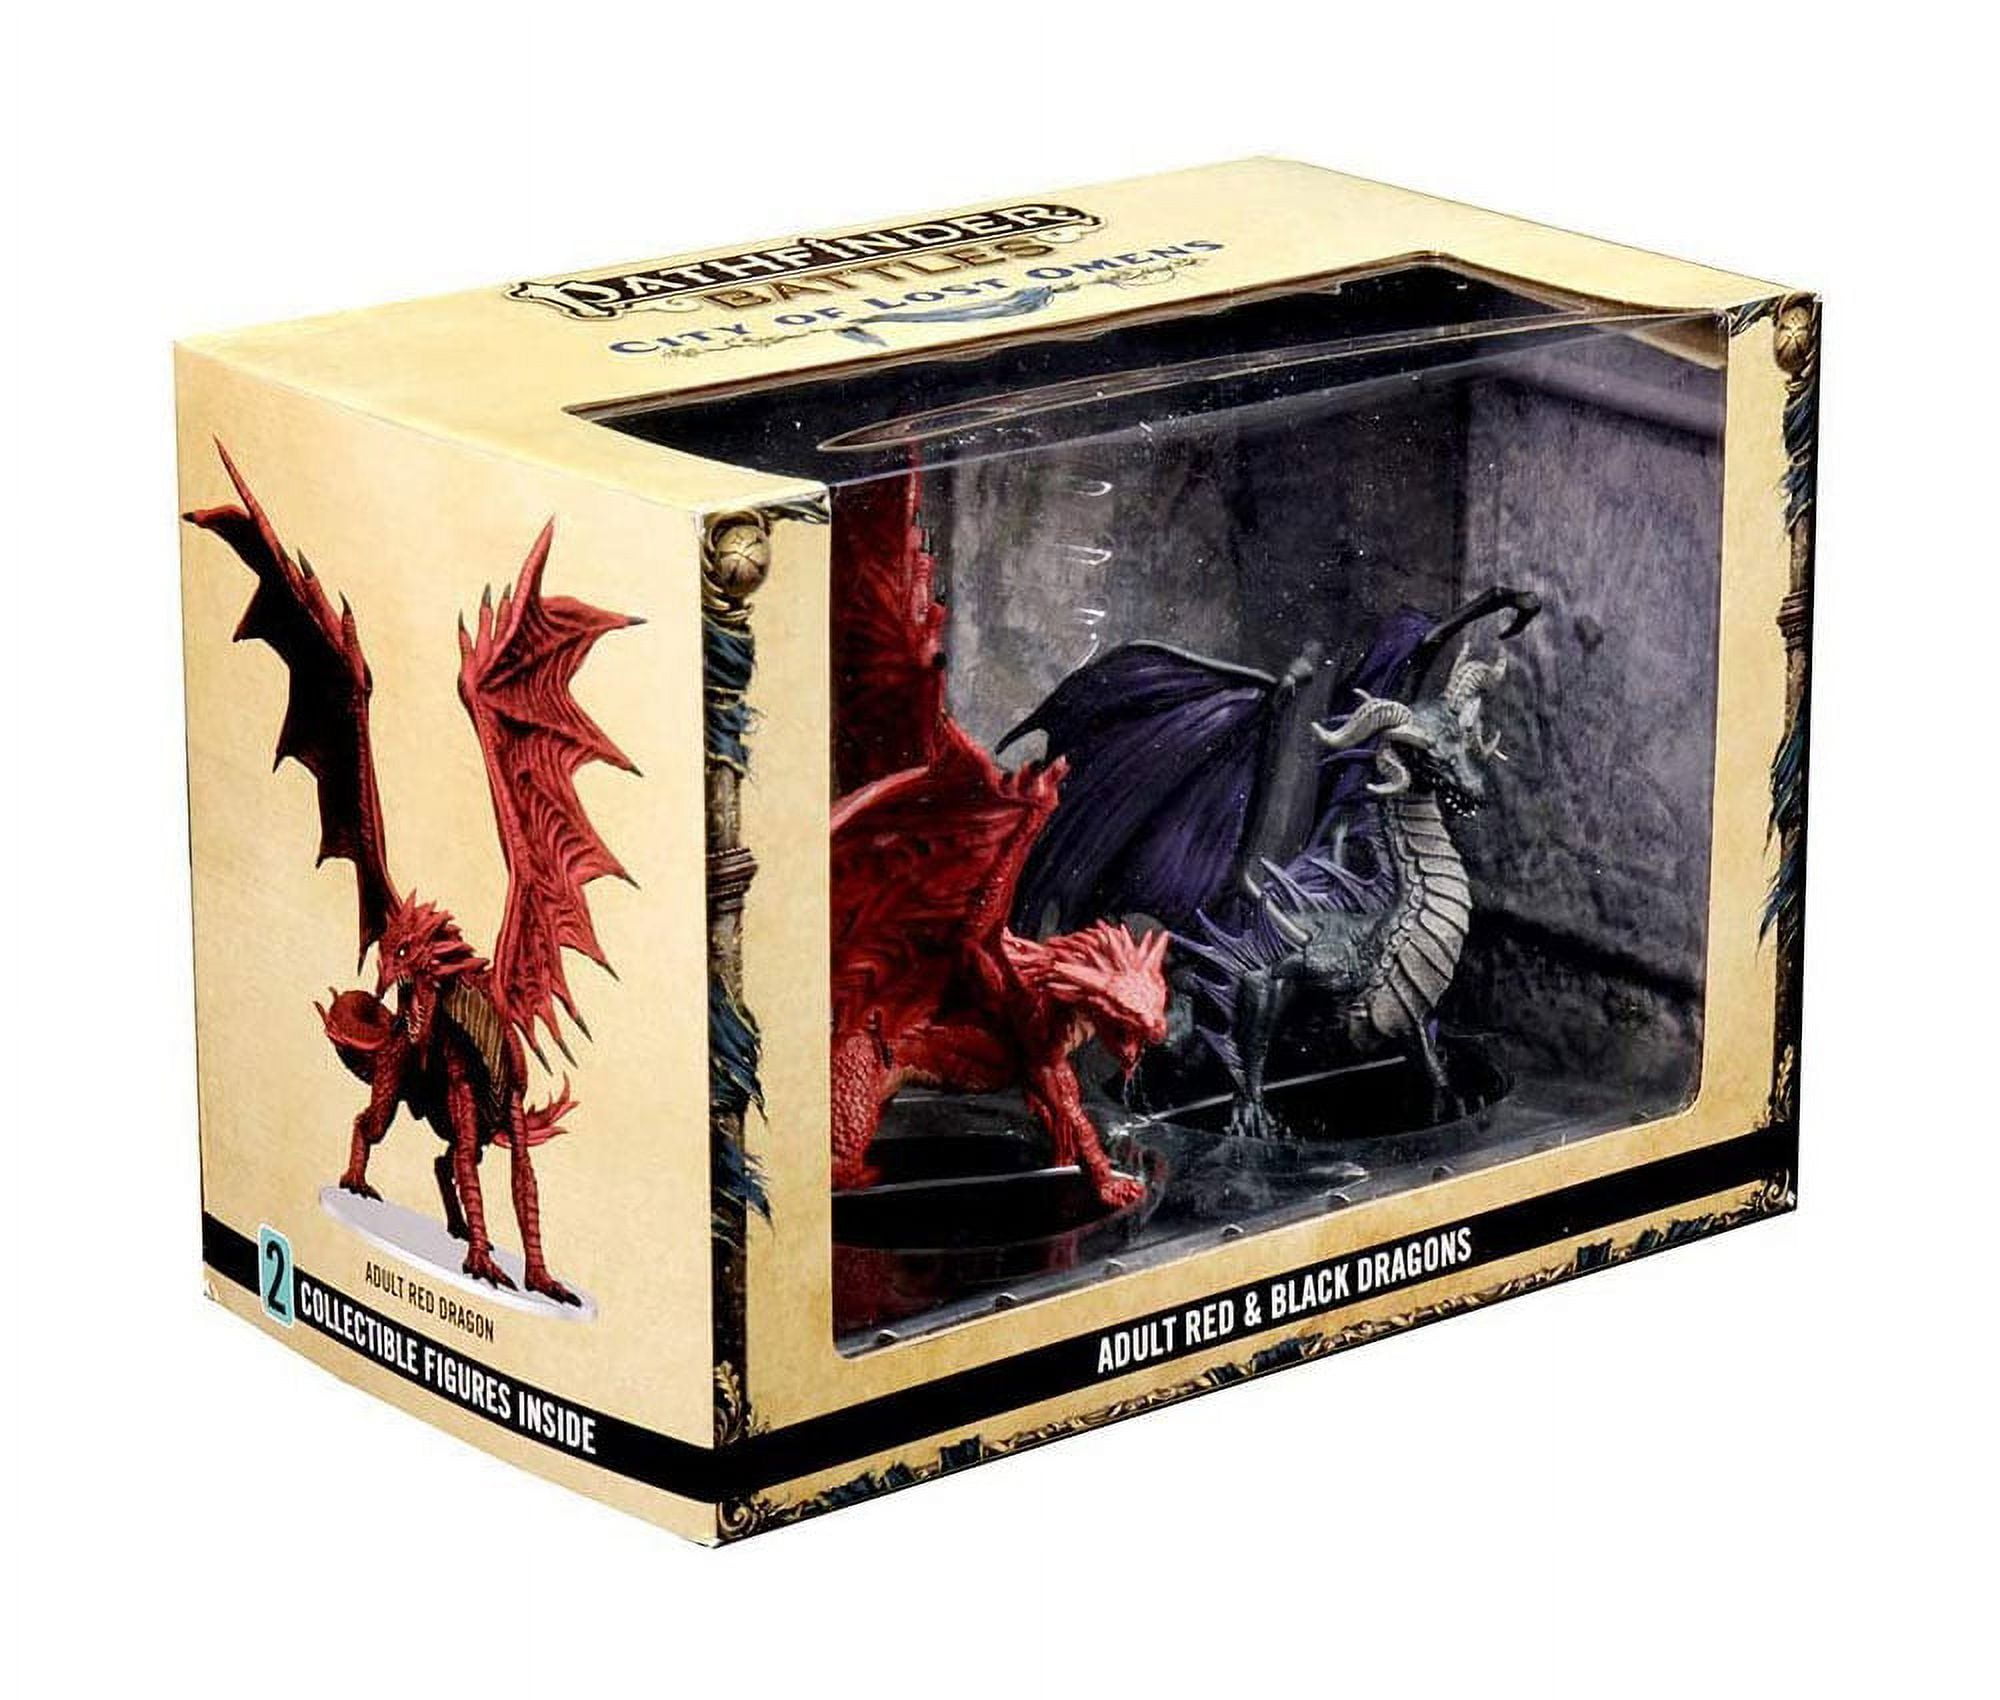 City of Lost Omens   Adult Red & Black Dragons New